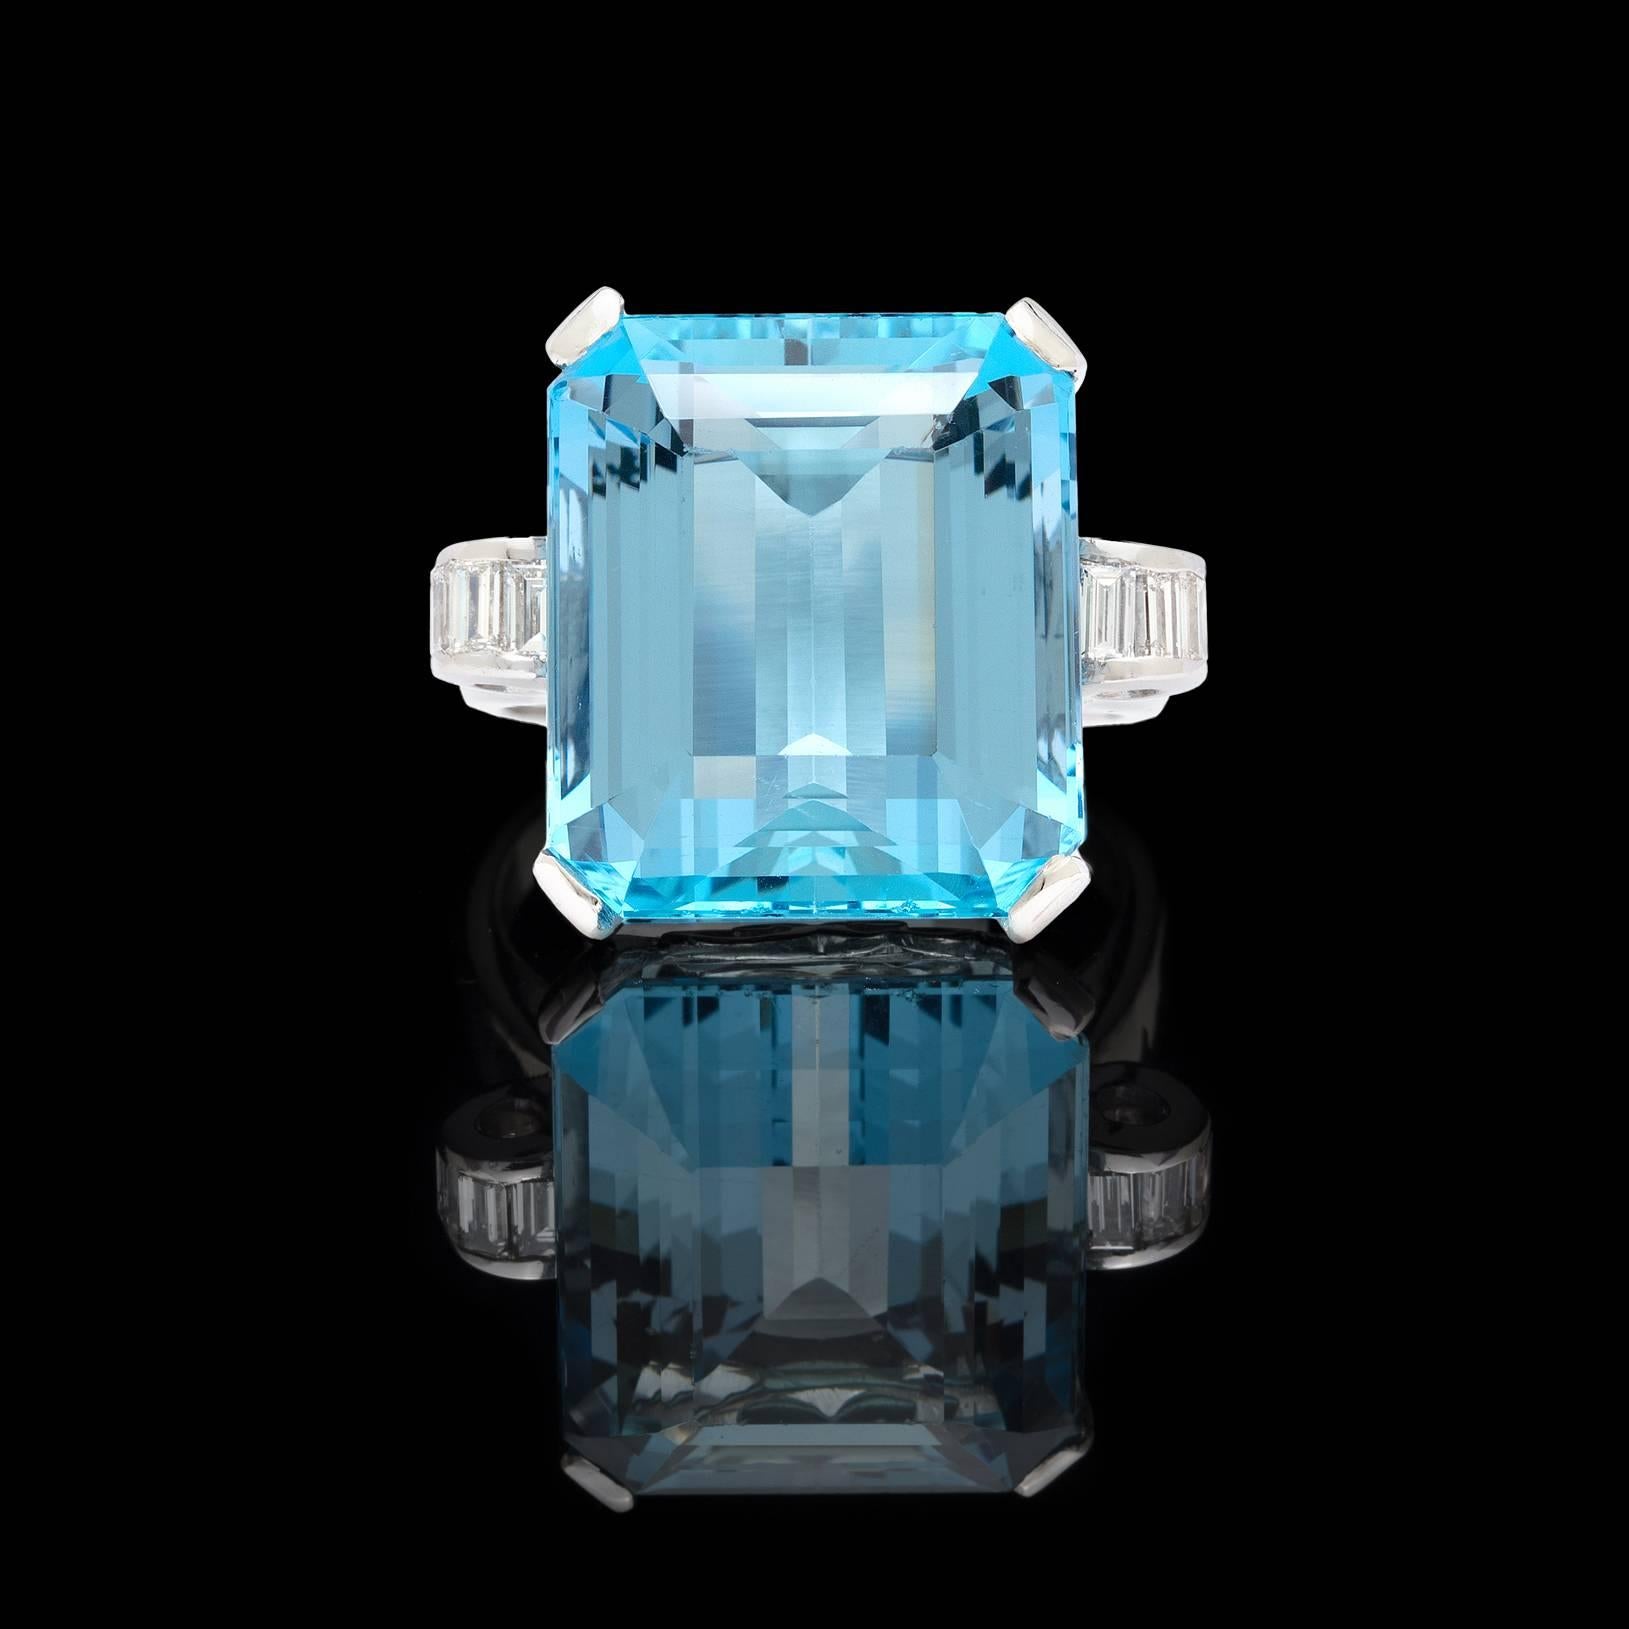 There's blue and then there's BLUE! This gorgeous 1930-40's estate ring features a 16 carat step cut aquamarine that exemplifies the color one looks for when searching for the ideal aqua. Elegantly set between eight clean/white baguette cut diamonds